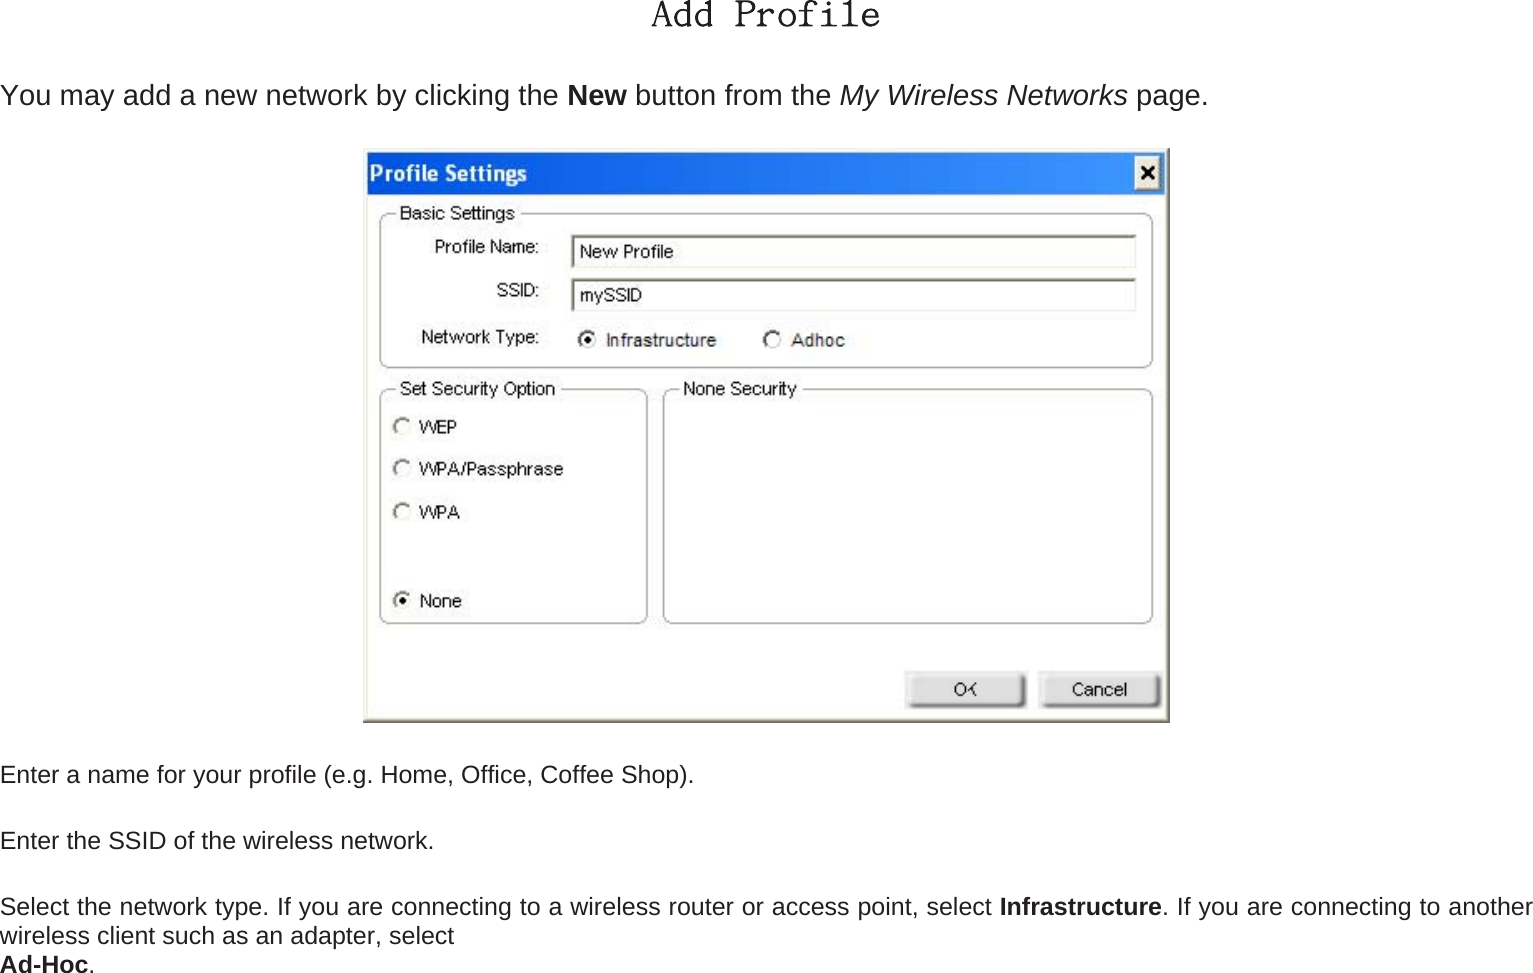 Add Profile You may add a new network by clicking the New button from the My Wireless Networks page.  Enter a name for your profile (e.g. Home, Office, Coffee Shop). Enter the SSID of the wireless network. Select the network type. If you are connecting to a wireless router or access point, select Infrastructure. If you are connecting to another wireless client such as an adapter, select   Ad-Hoc. 